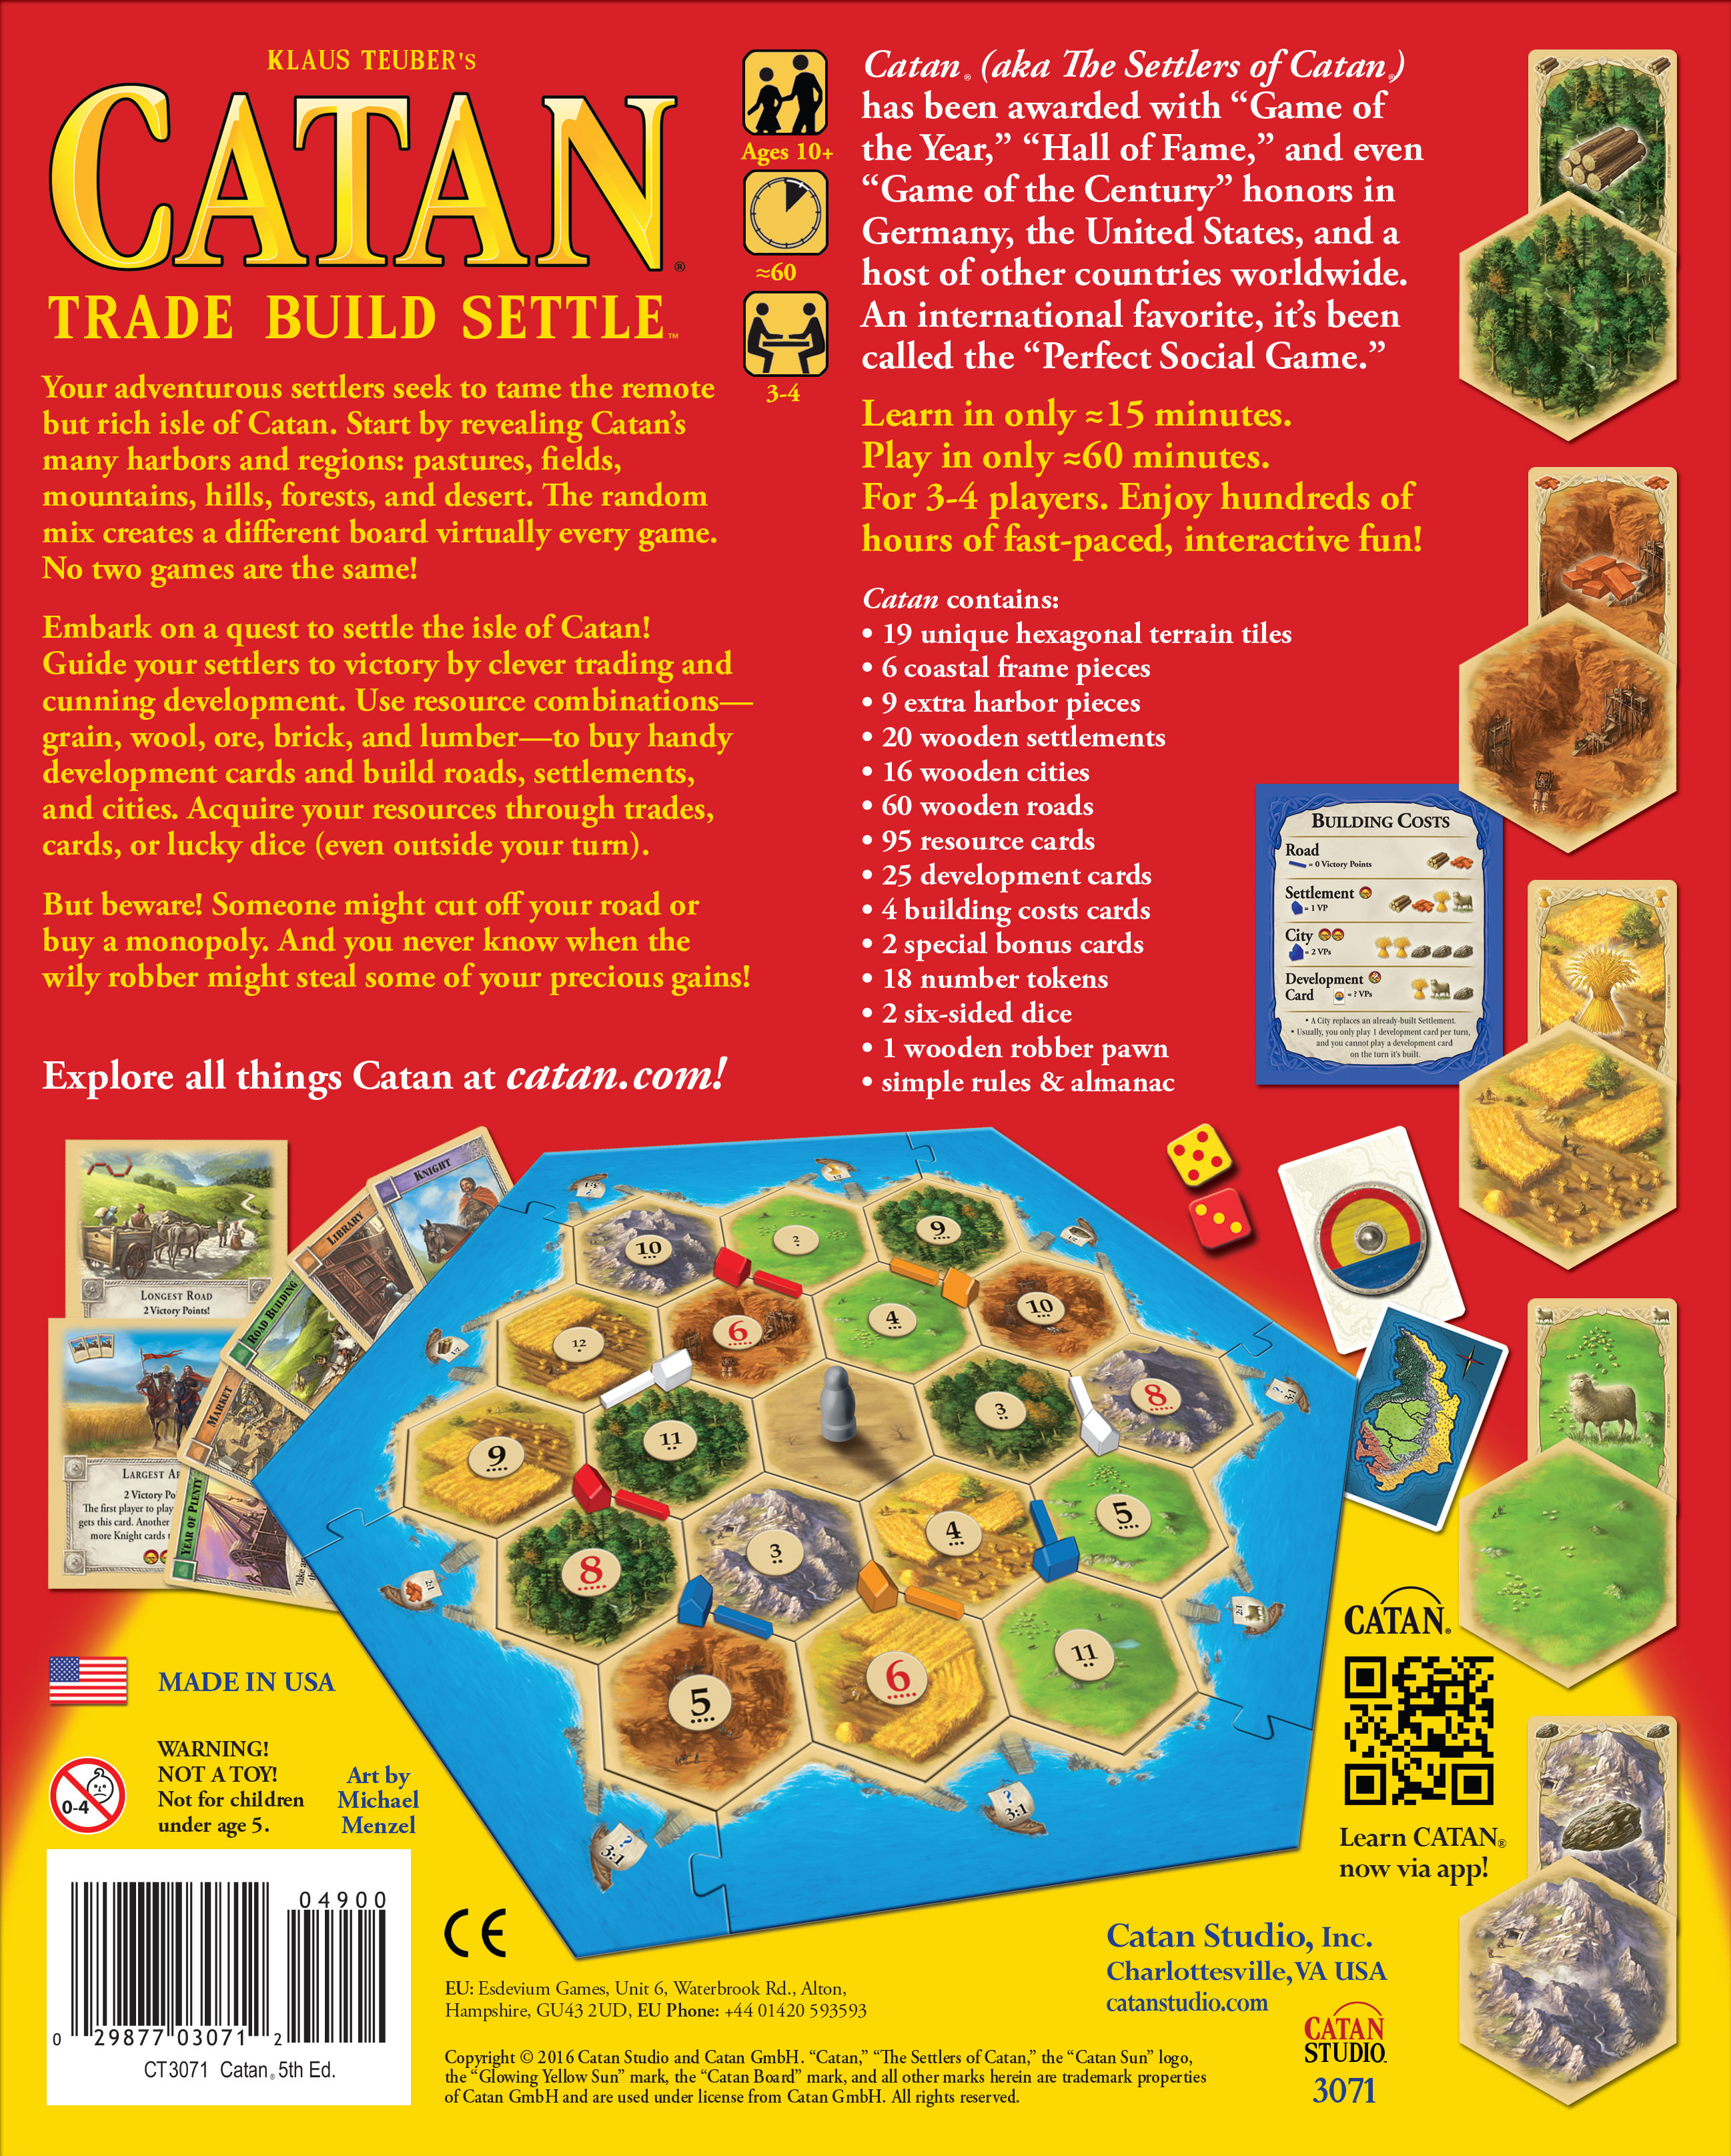 Catan Strategy Board Game: 5th Edition for Ages 10 and up, from Asmodee - image 3 of 7